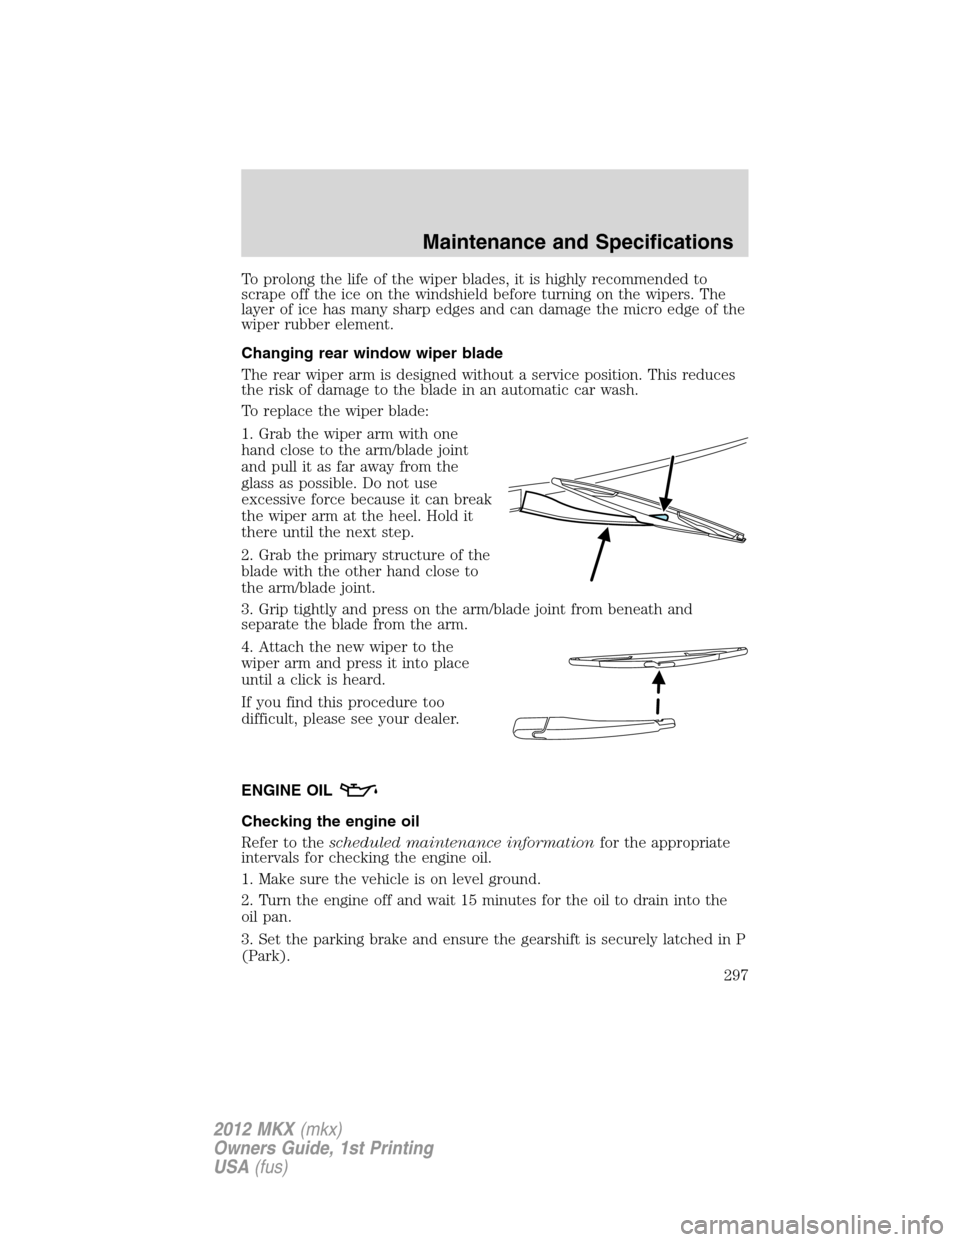 LINCOLN MKX 2012  Owners Manual To prolong the life of the wiper blades, it is highly recommended to
scrape off the ice on the windshield before turning on the wipers. The
layer of ice has many sharp edges and can damage the micro e